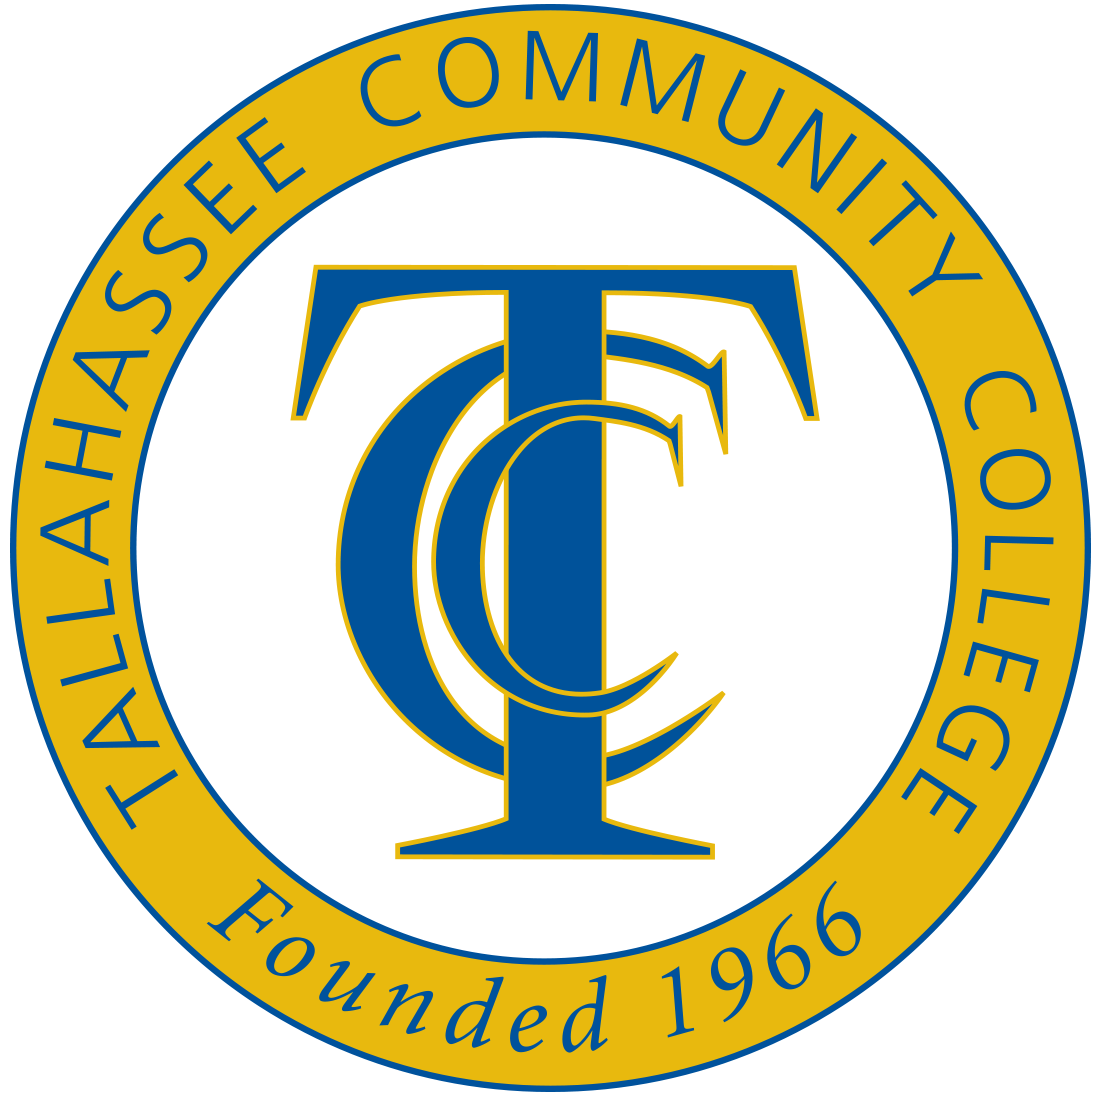 Tallahassee Community College Founded 1966 TCC logo